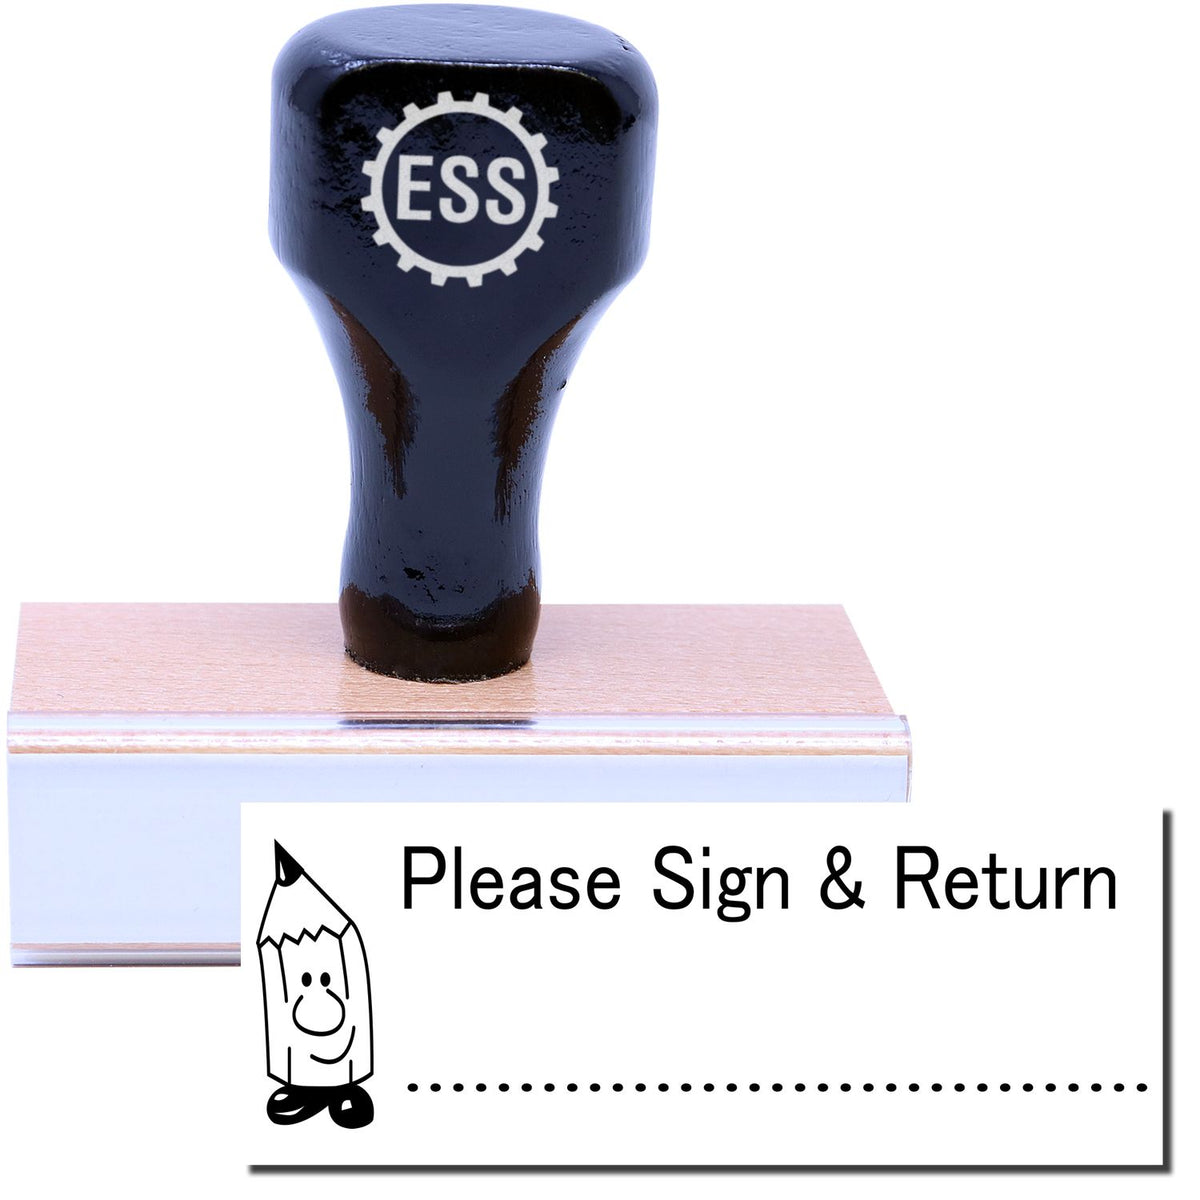 A stock office rubber stamp with a stamped image showing how the text &quot;Please Sign &amp; Return&quot; in a large font with an image of a sharpened pencil and a dotted line underneath is displayed after stamping.